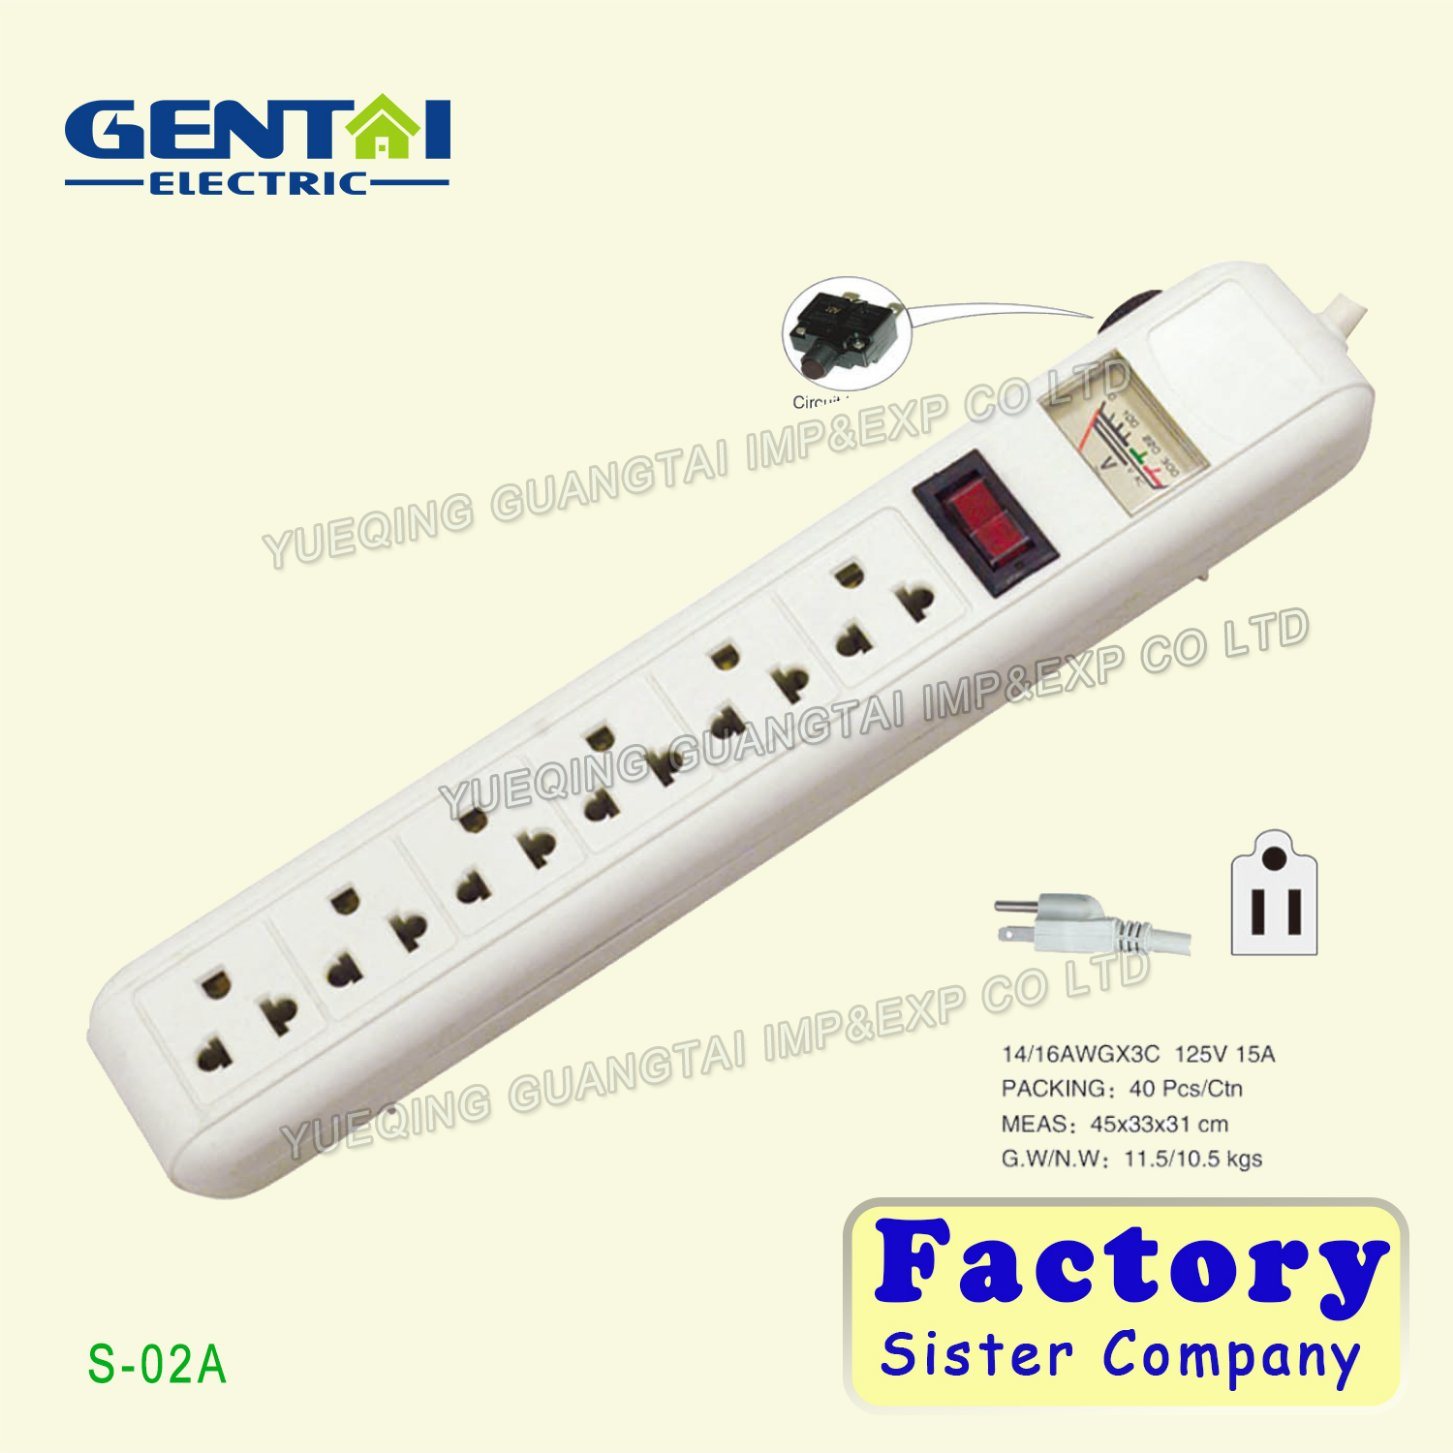 6 Way Electrical Universal Power Strip with Switch and Voltmeter